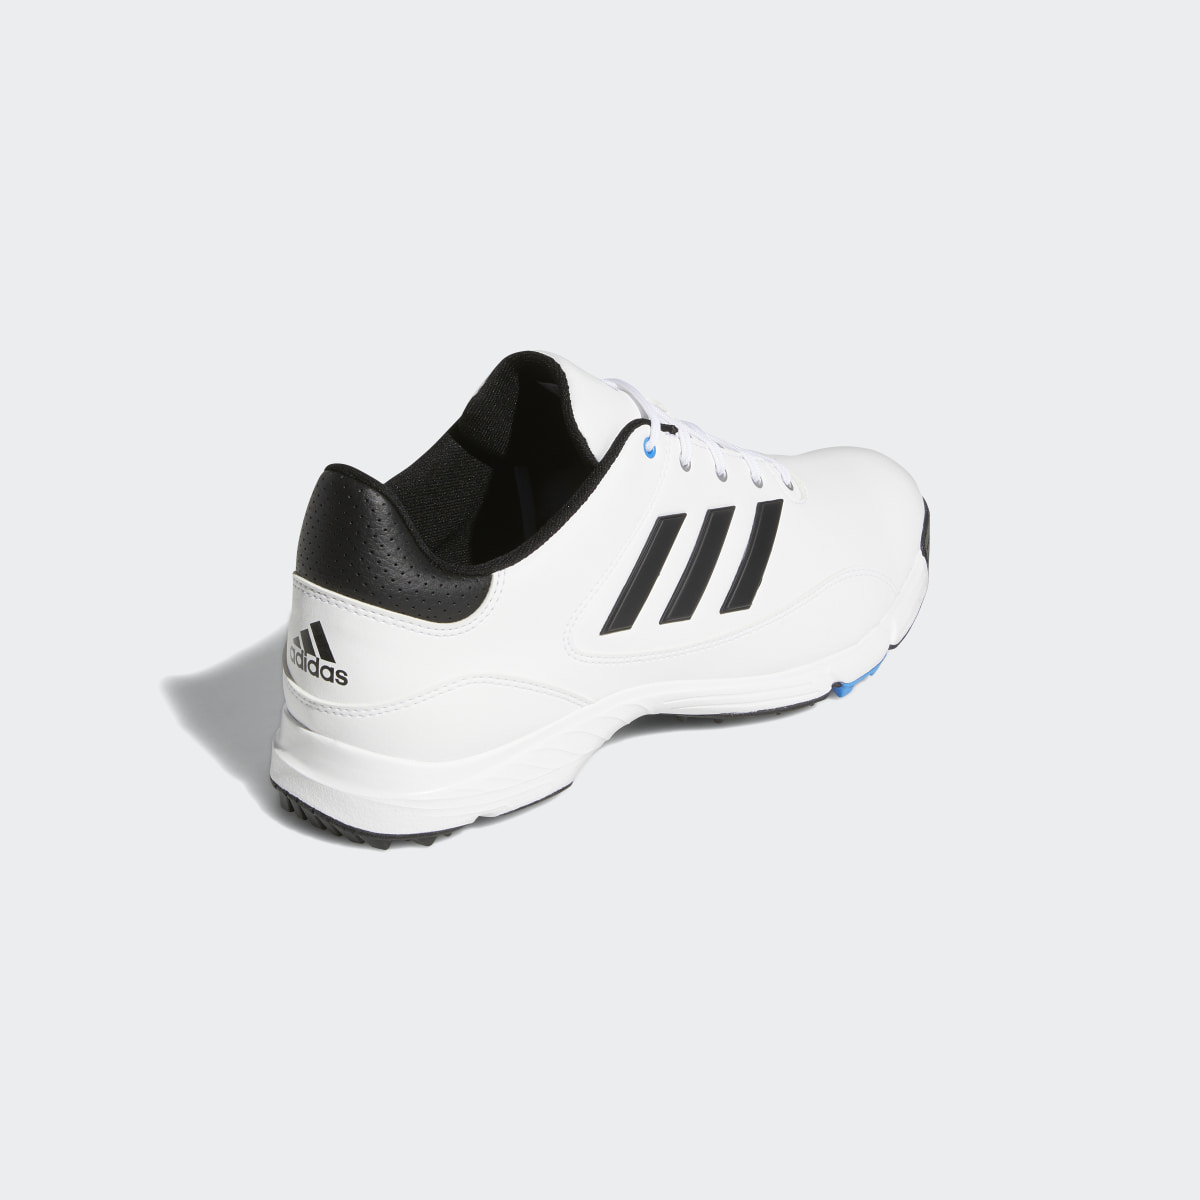 Adidas Golflite Max Wide Golf Shoes. 6